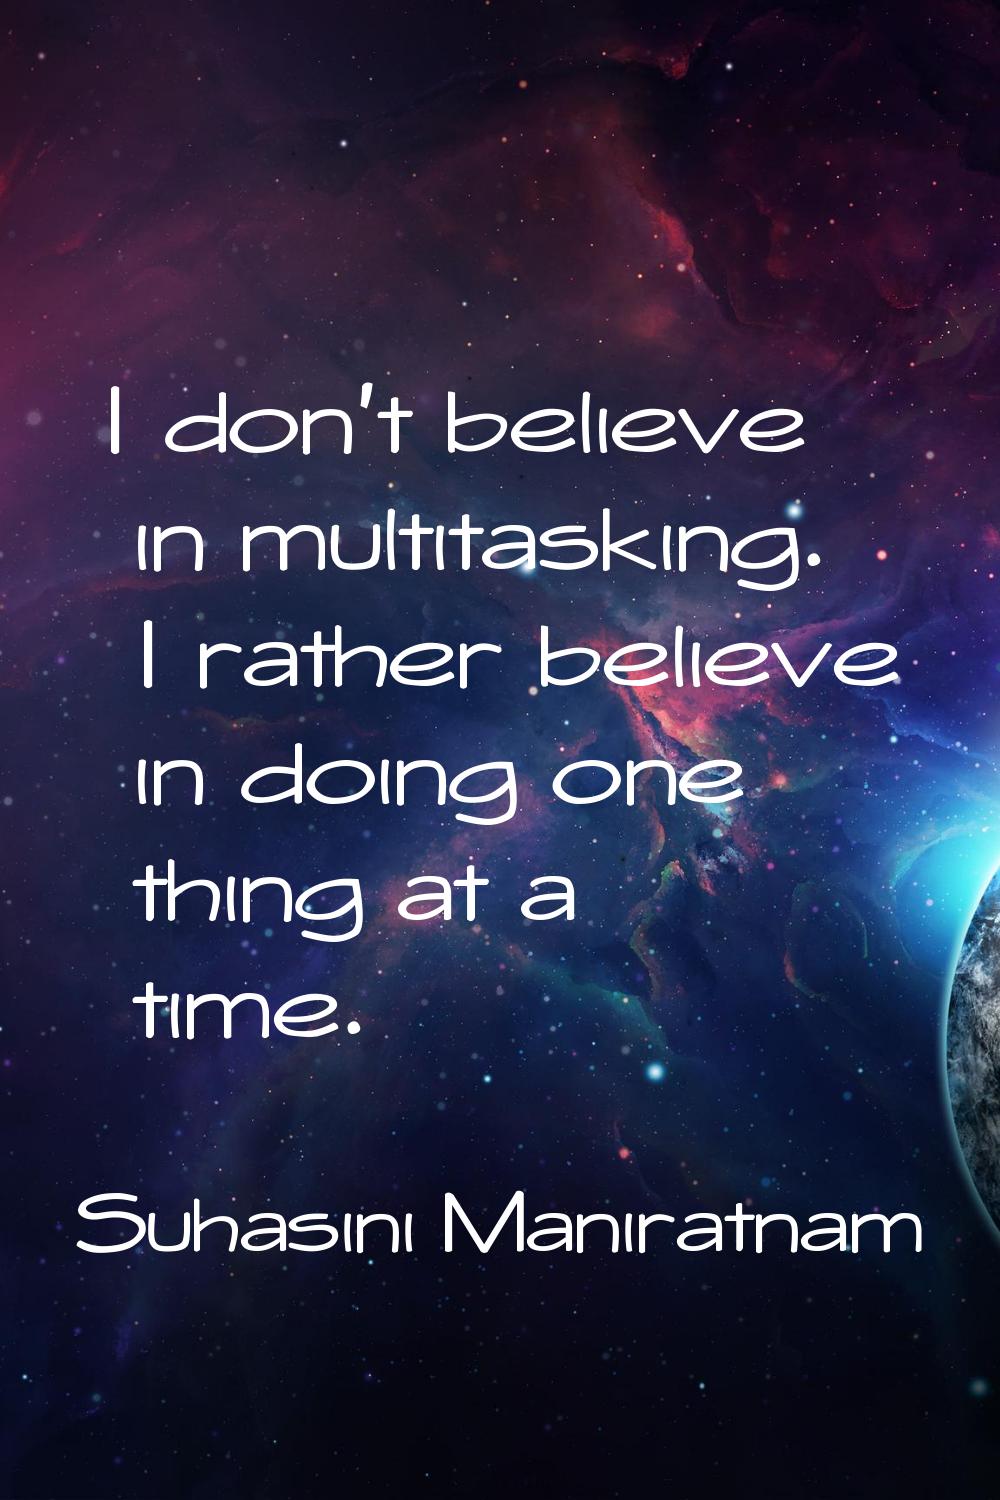 I don't believe in multitasking. I rather believe in doing one thing at a time.